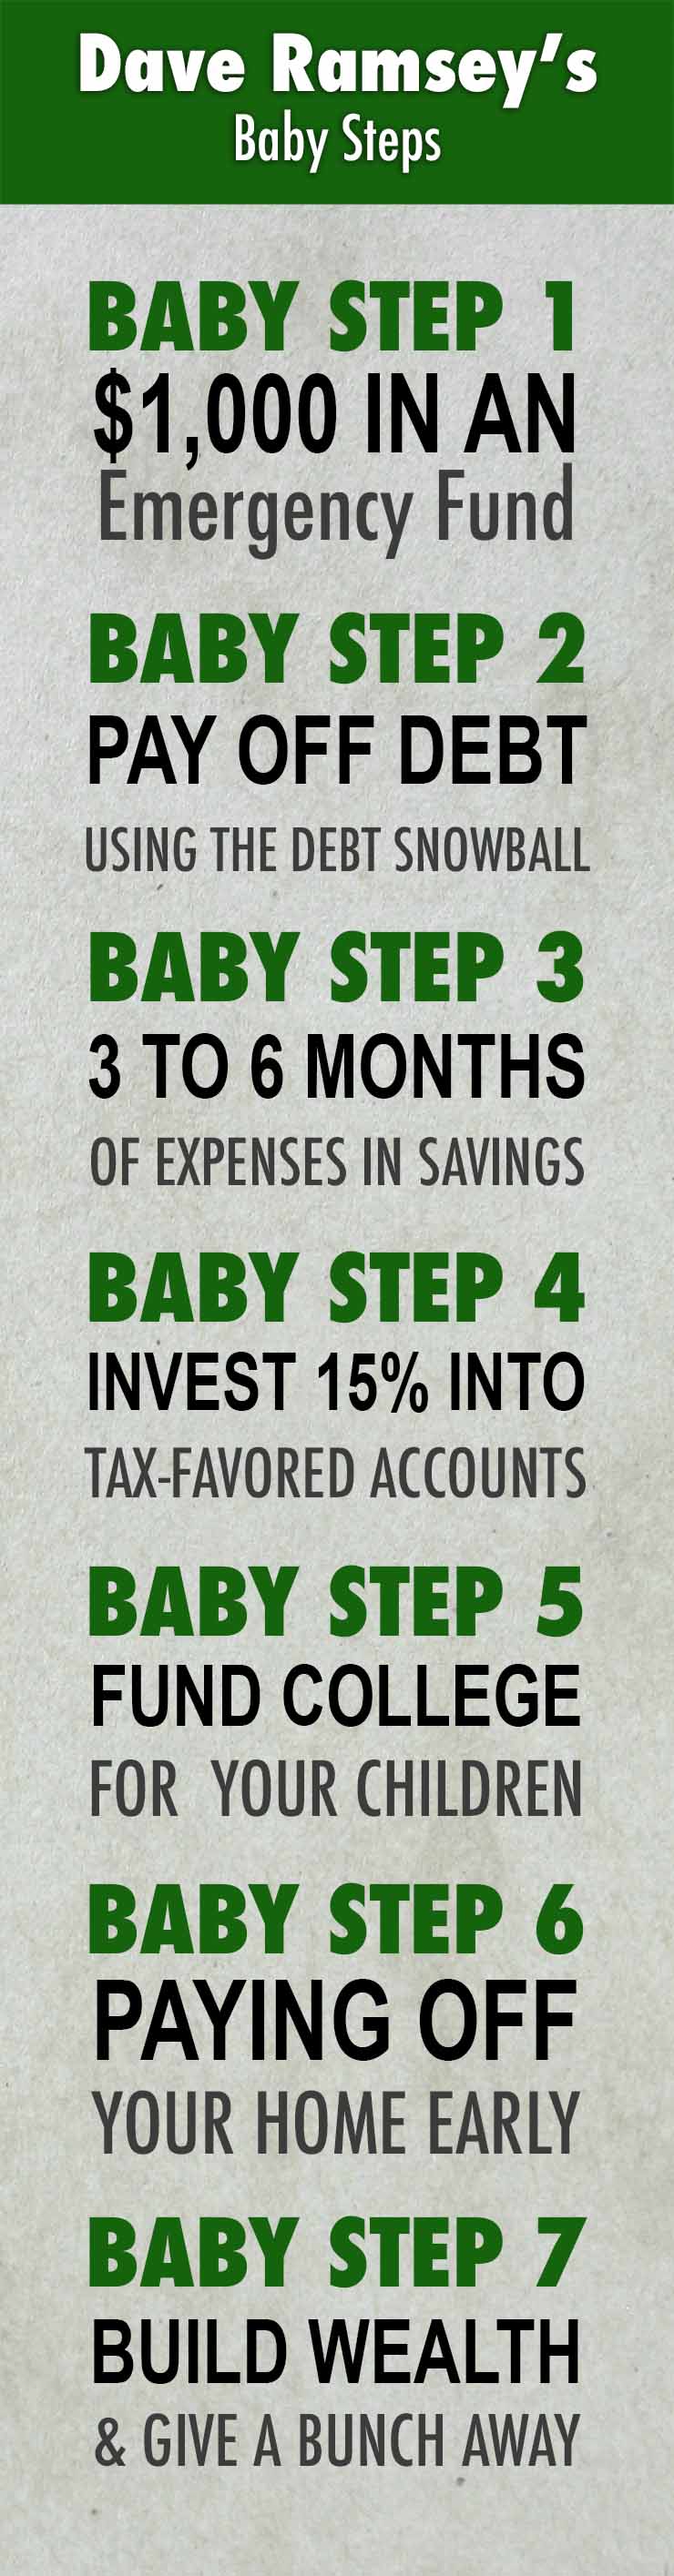 dave ramseys baby steps infographic